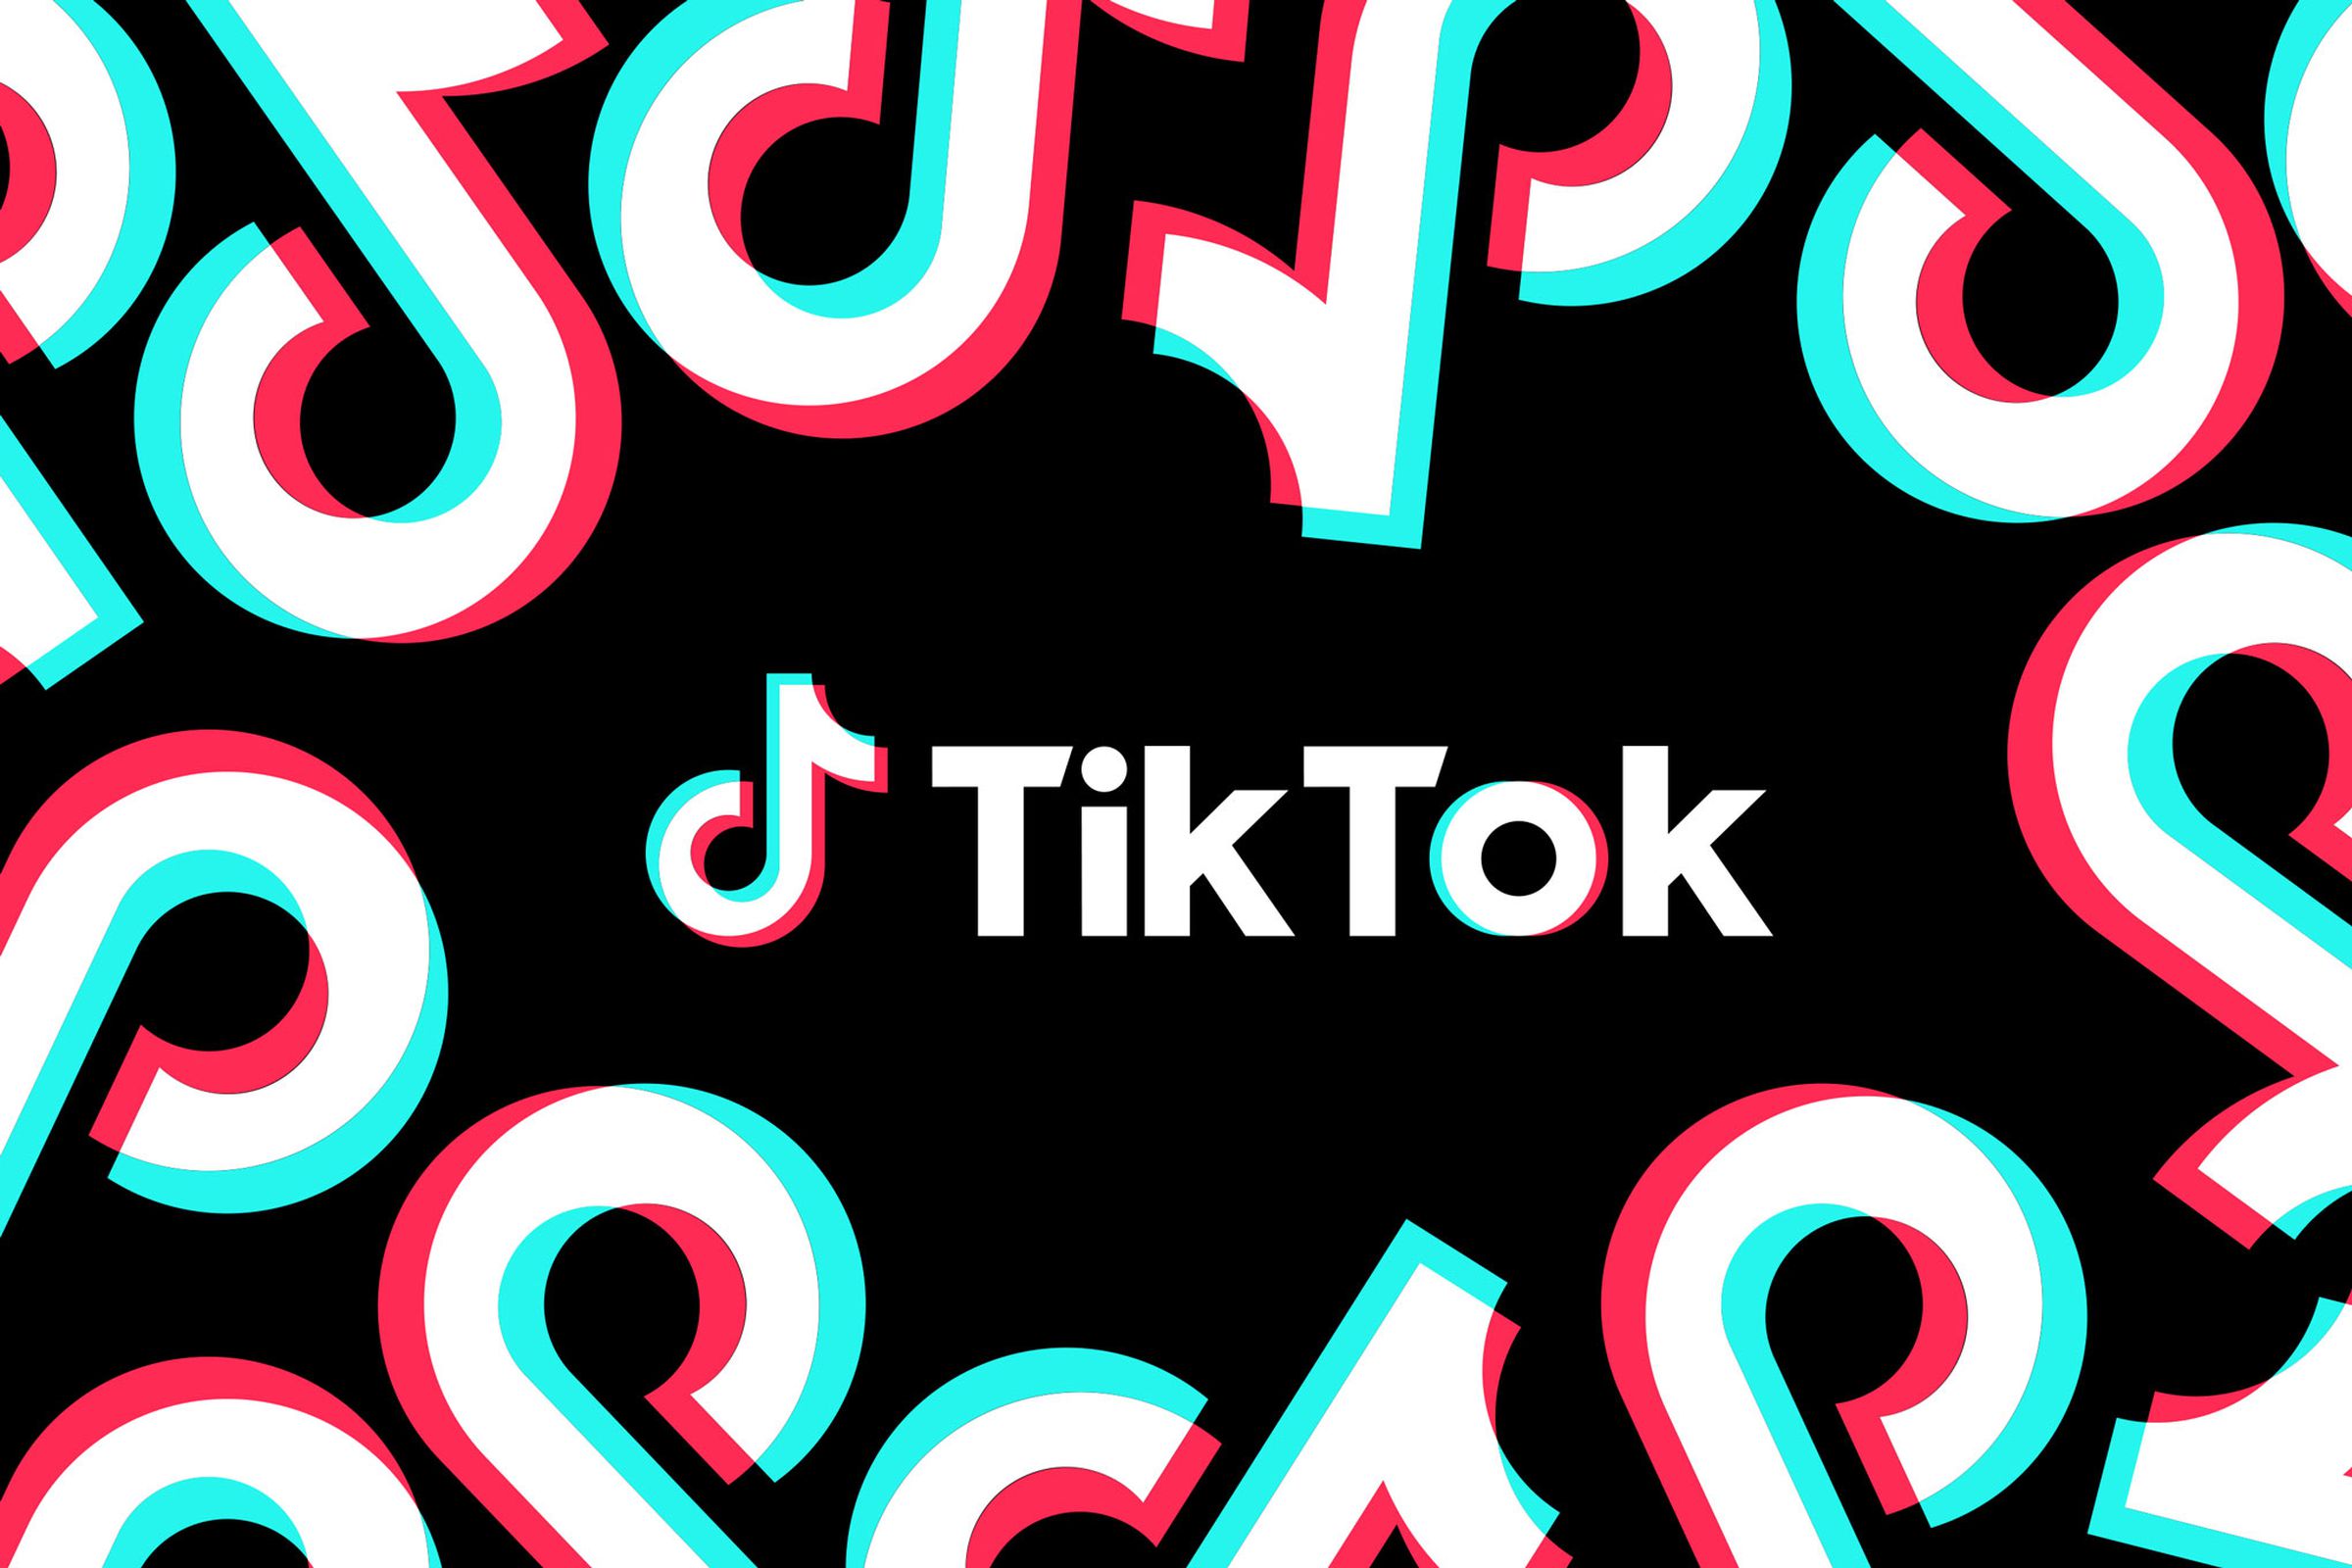 The TikTok logo on a black background with repeating music note motifs